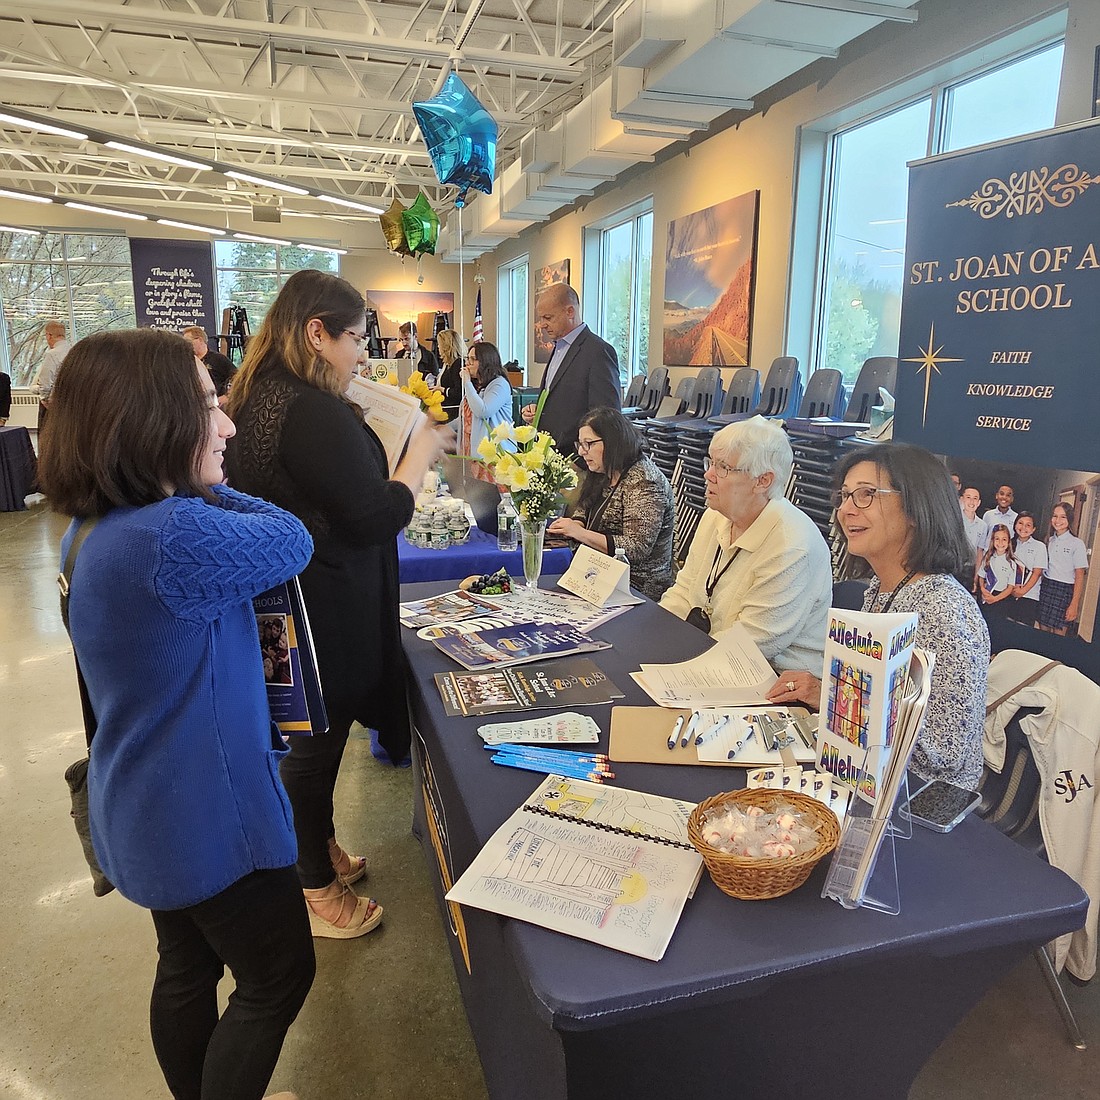 Representatives of St. Joan of Arc School, Marlton, chat with attendees during the April 11 job fair in Notre Dame High School, Lawrenceville. Mary Stadnyk photo